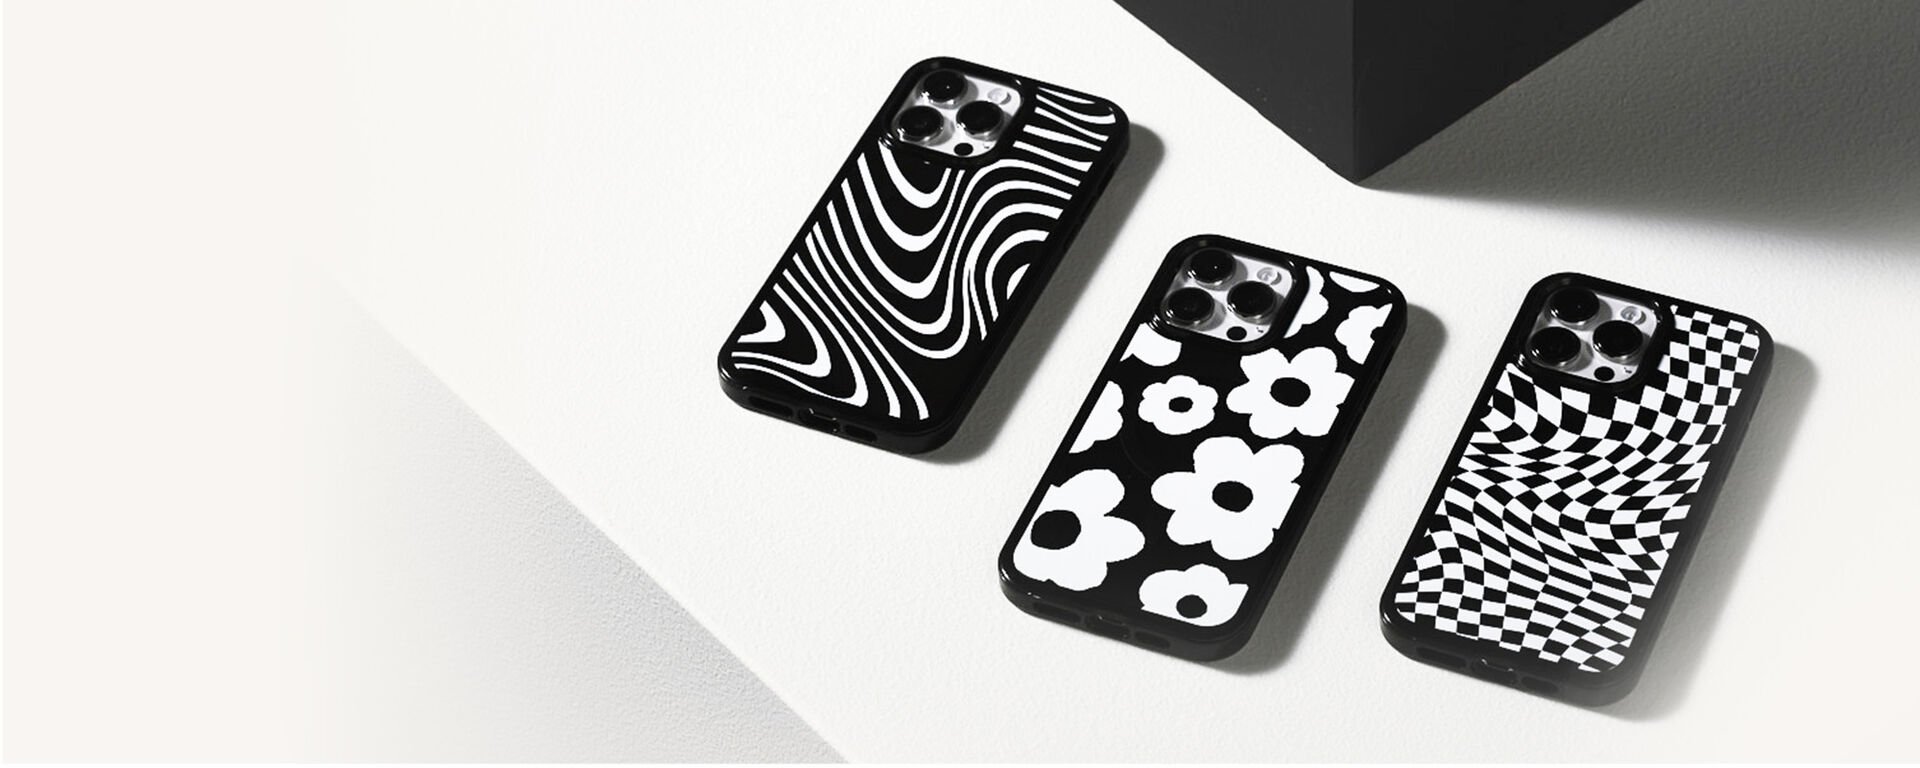 OtterBox Black and White collection phone cases 